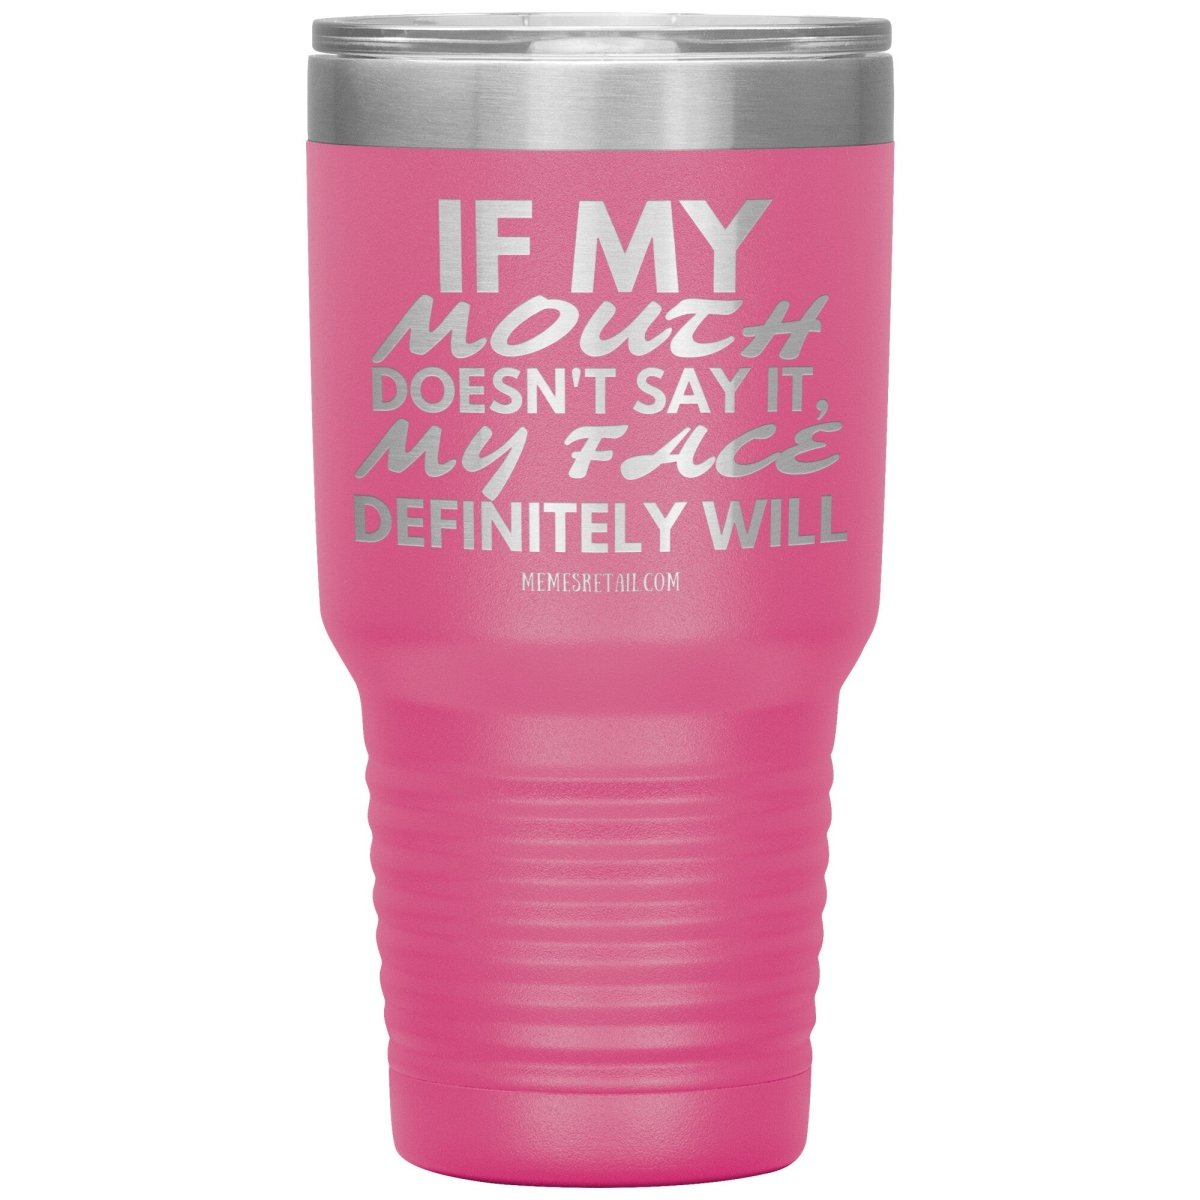 If my mouth doesn't say it, my face definitely will Tumblers, 30oz Insulated Tumbler / Pink - MemesRetail.com